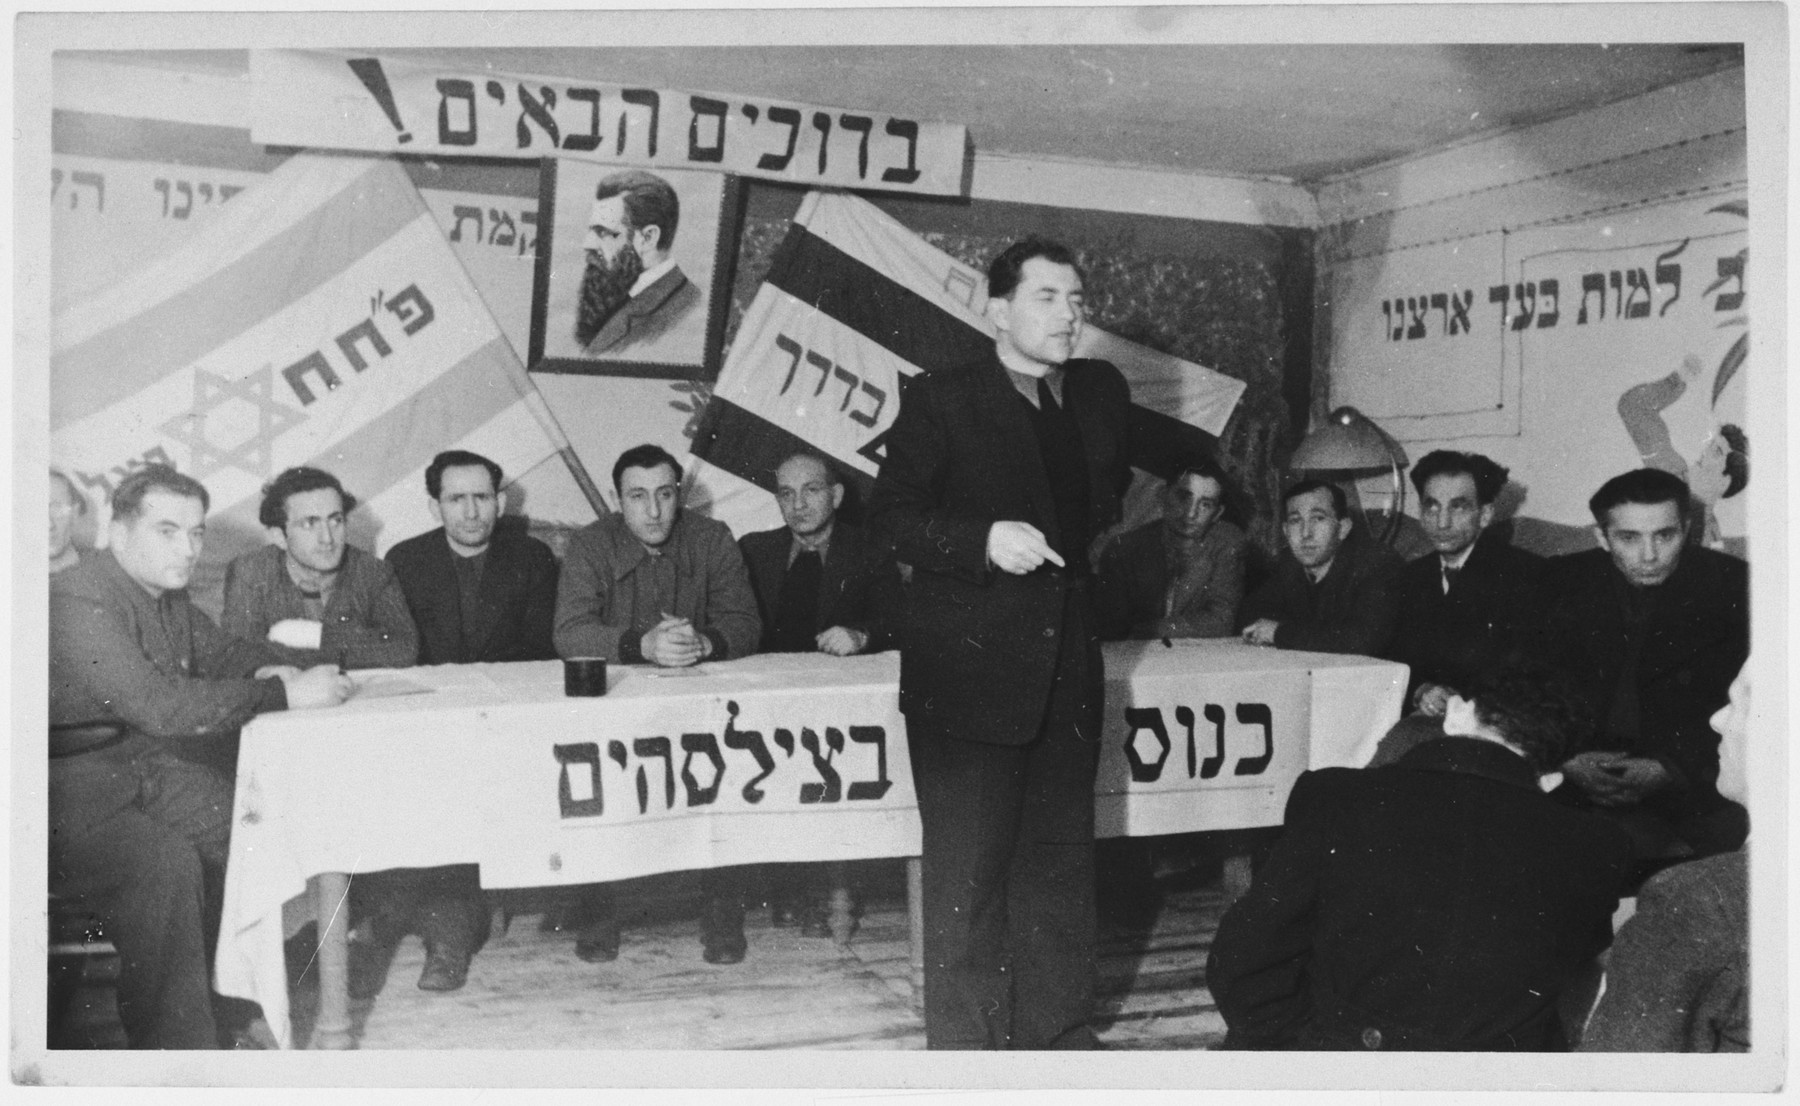 Zionist meeting of the Partizanim-Hayyalim-Halutzim in the Zeilsheim displaced persons' camp held in a room bedecked with a flag, posters and a portrait of Theodore Herzl.